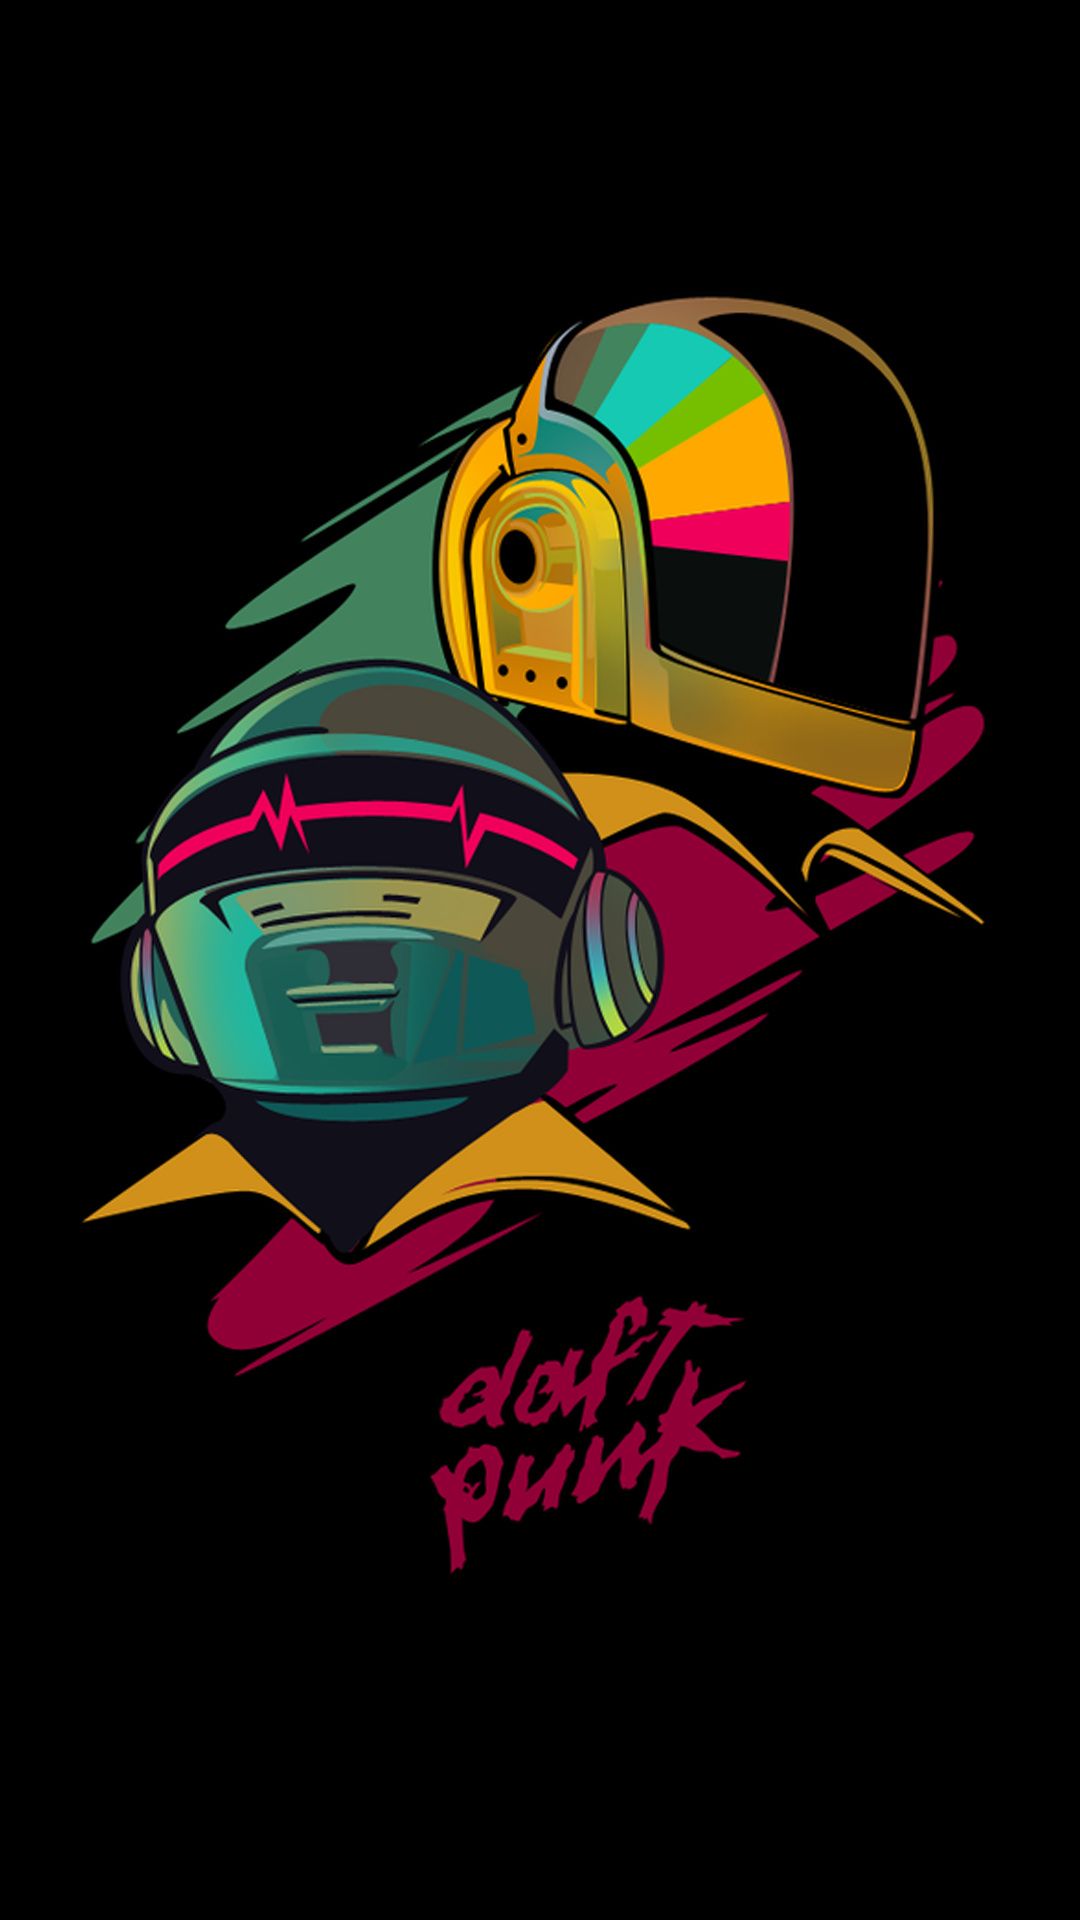 Daft Punk Wallpaper for iPhone Pro Max, X, 6